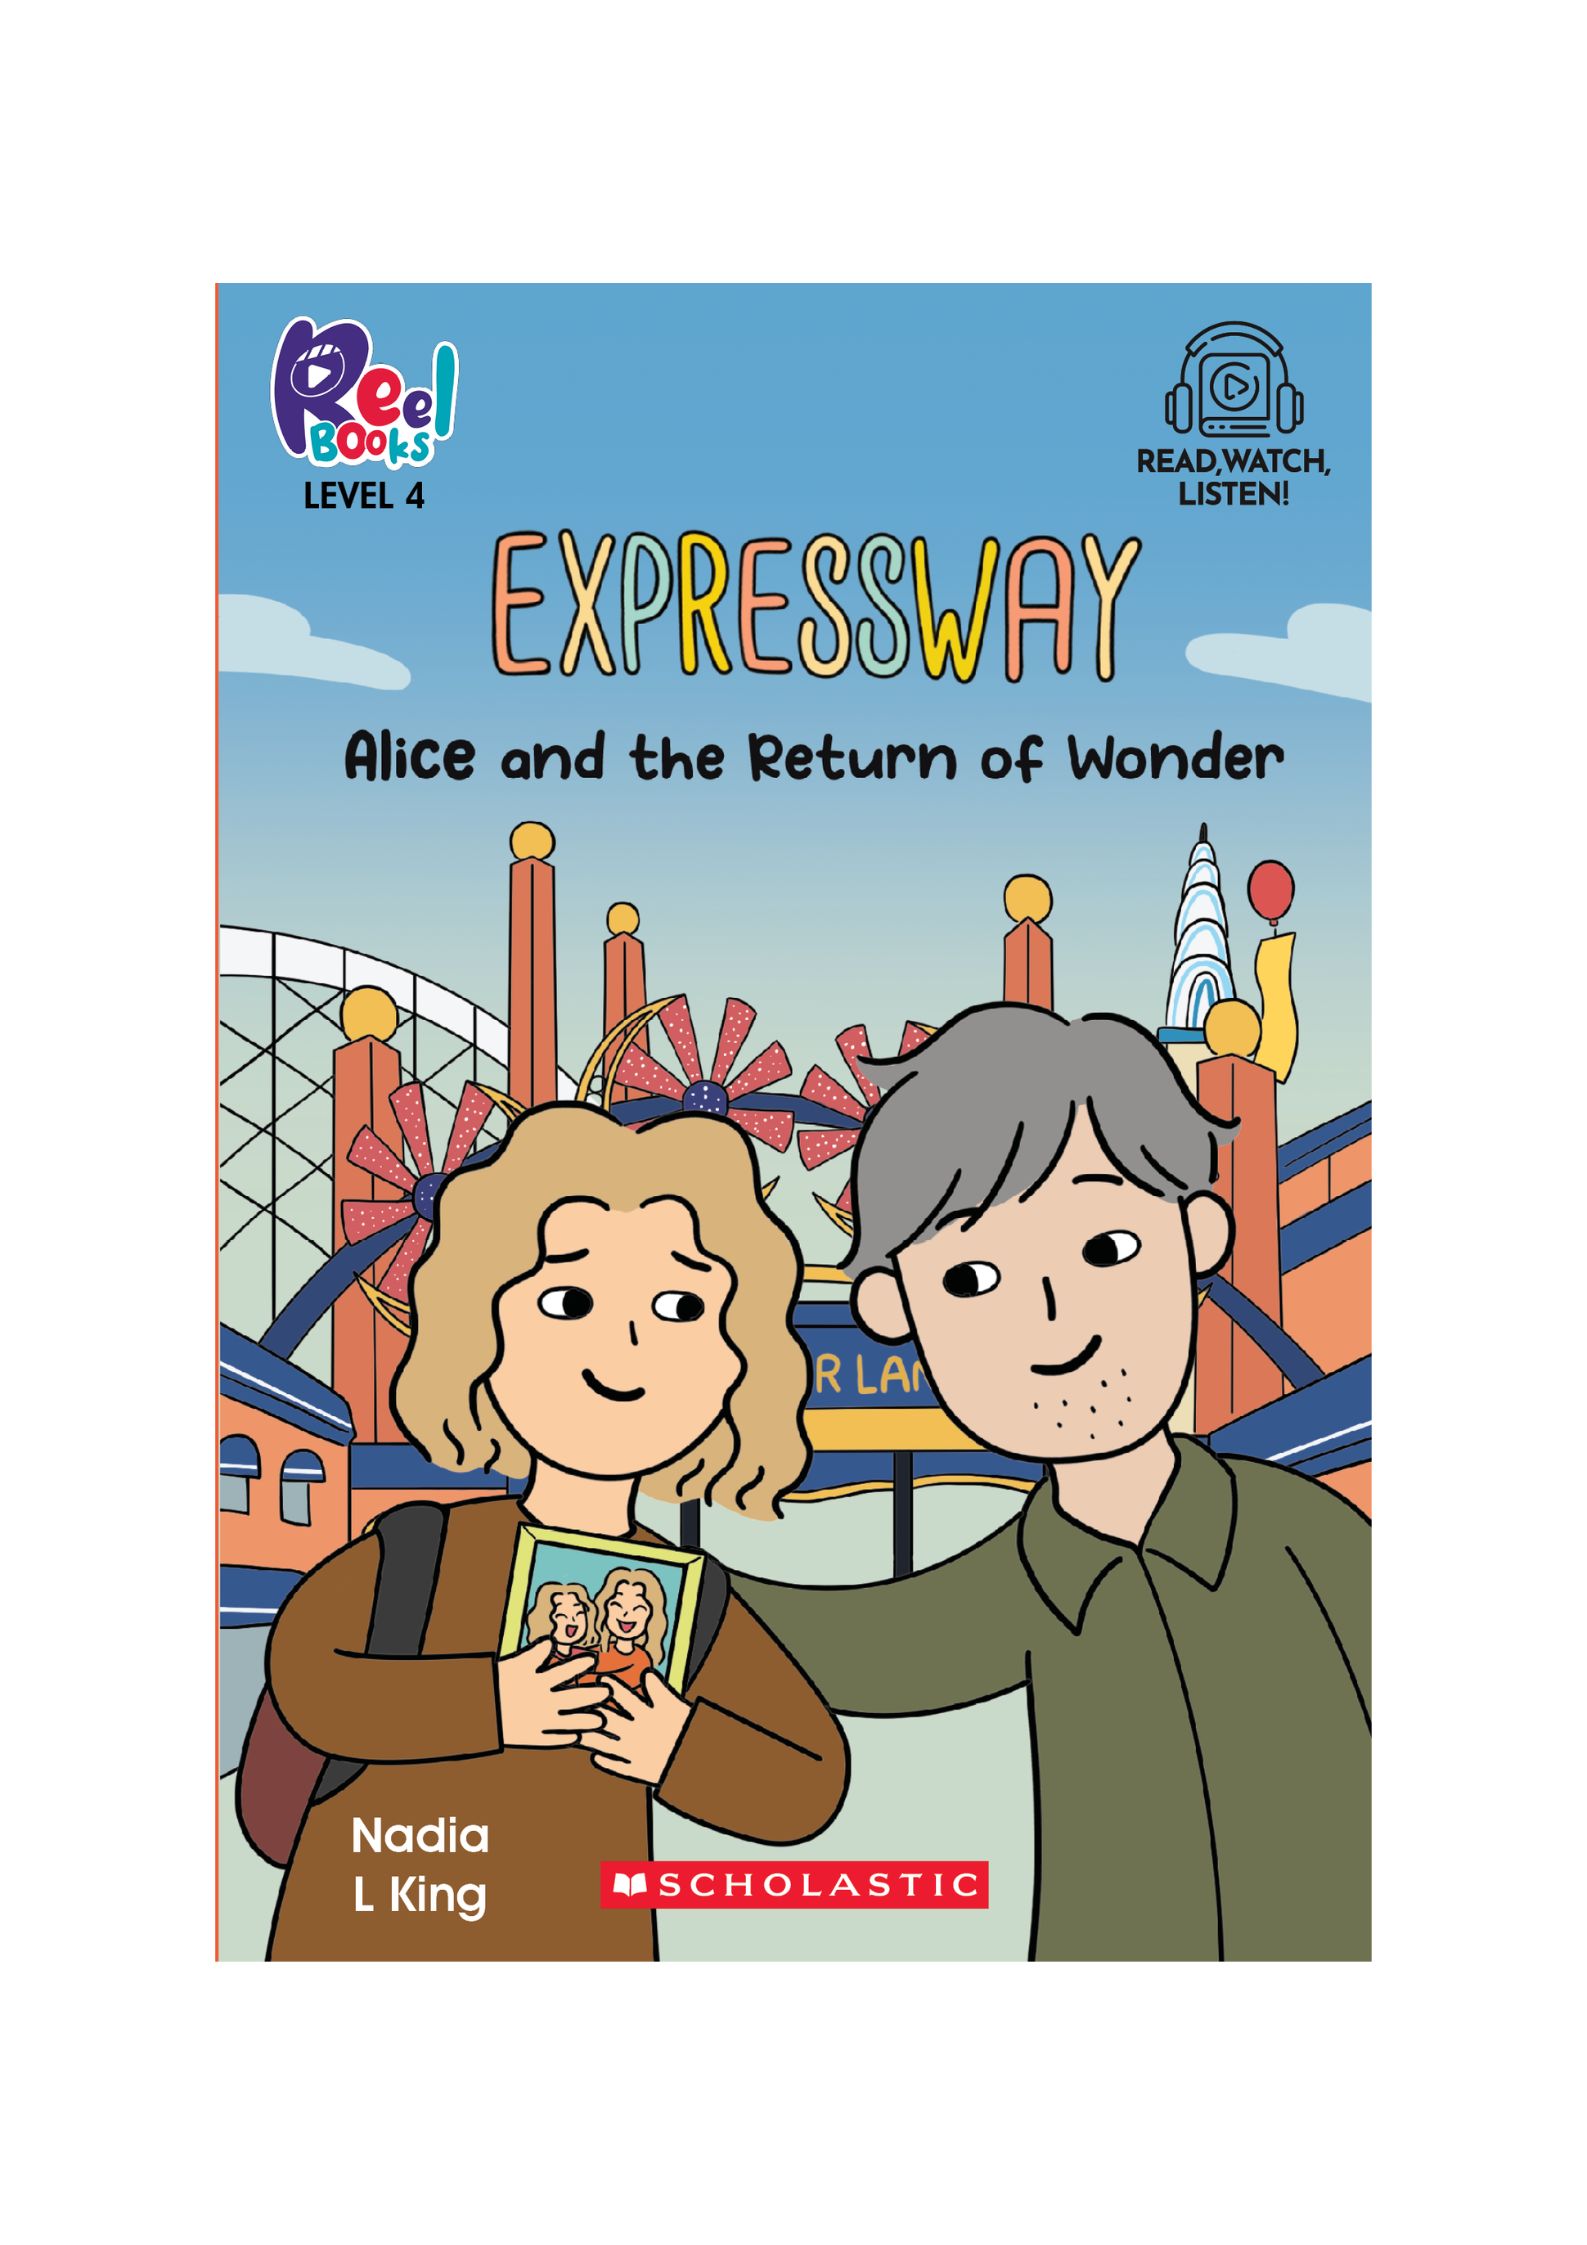 Expressway #1: Alice and the Return of Wonder